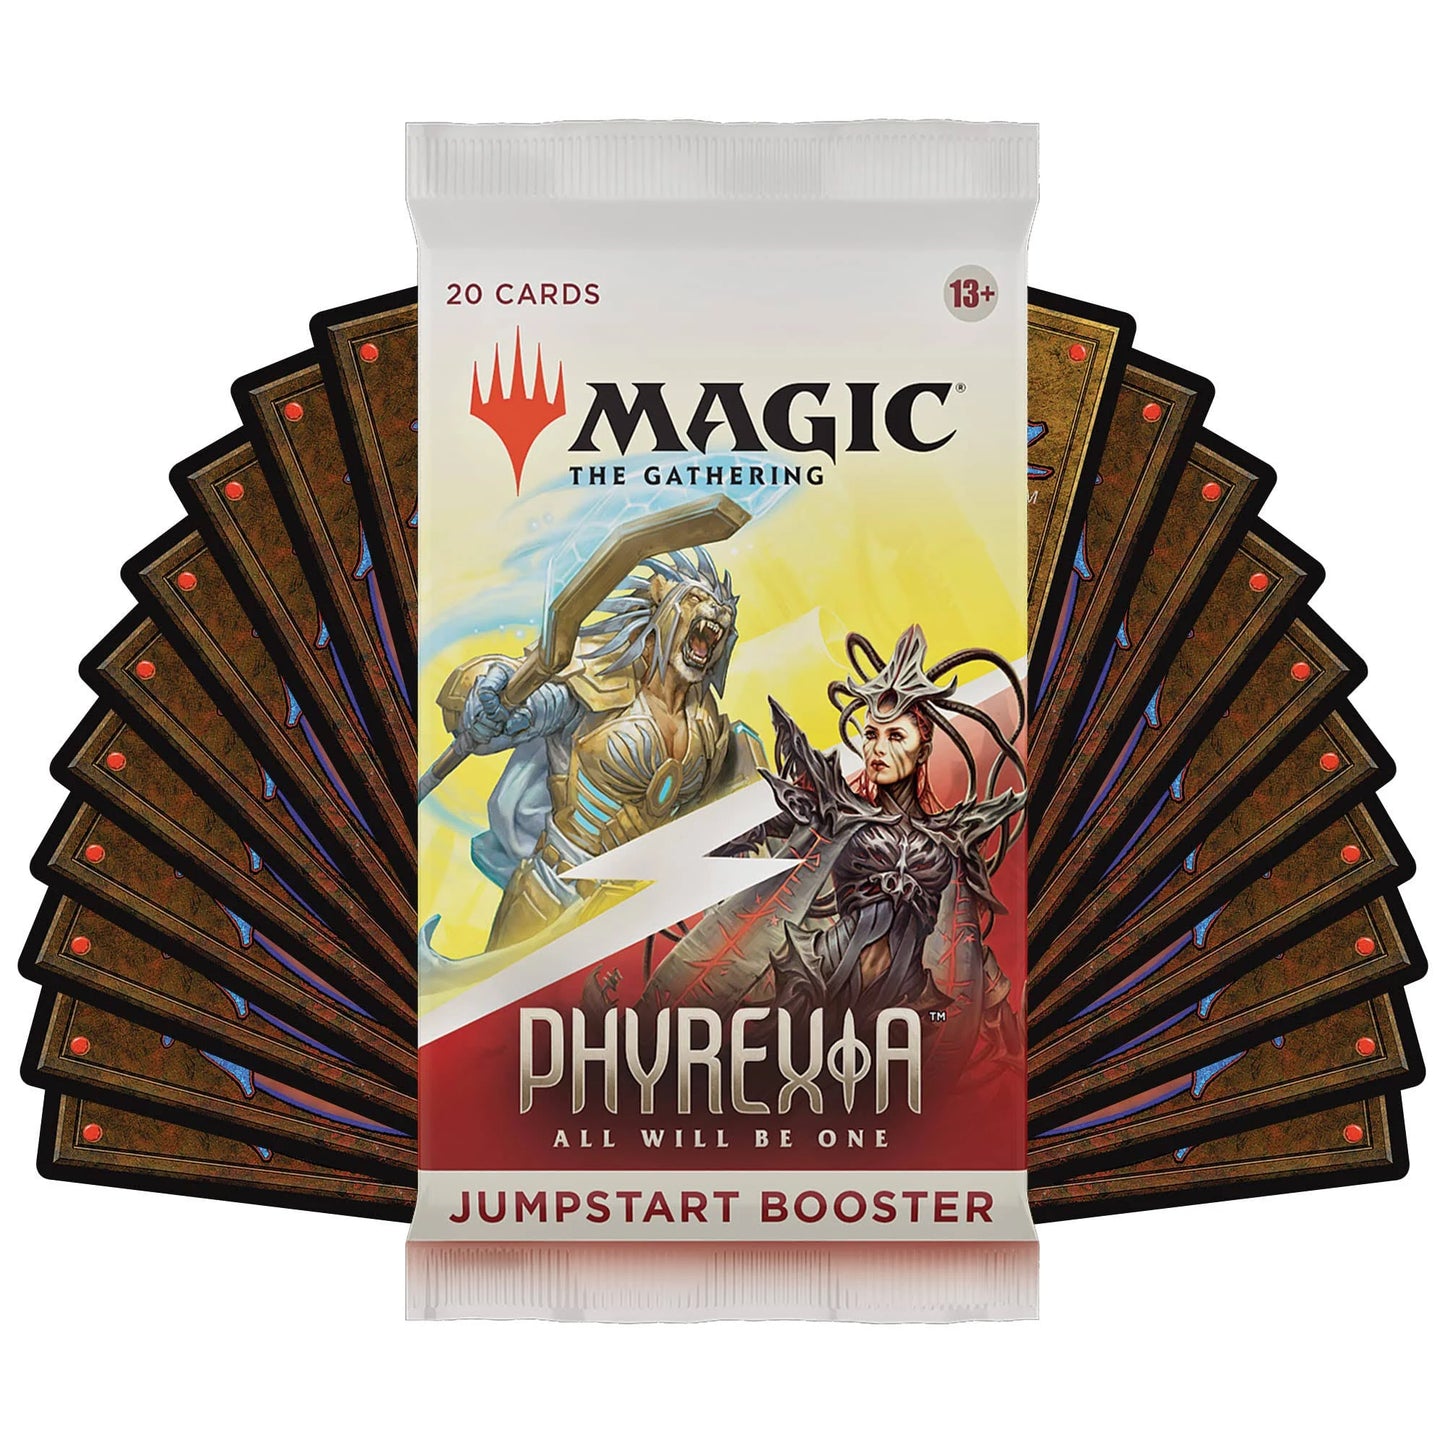 Magic: The Gathering: Phrexia - All Will Be One Jumpstart Booster Pack